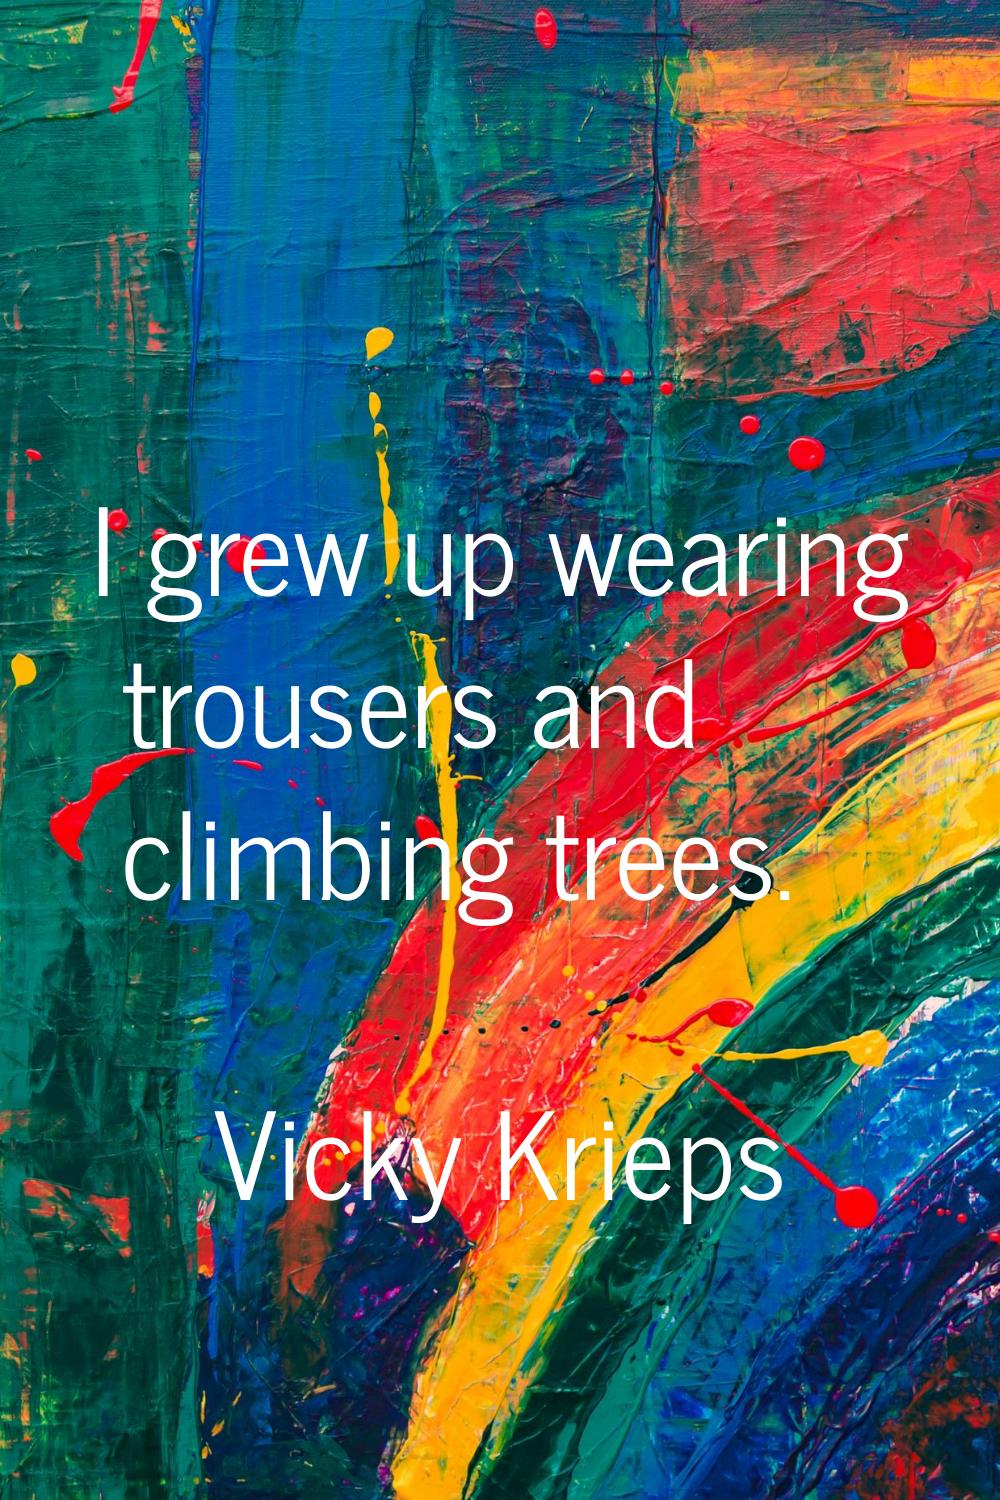 I grew up wearing trousers and climbing trees.